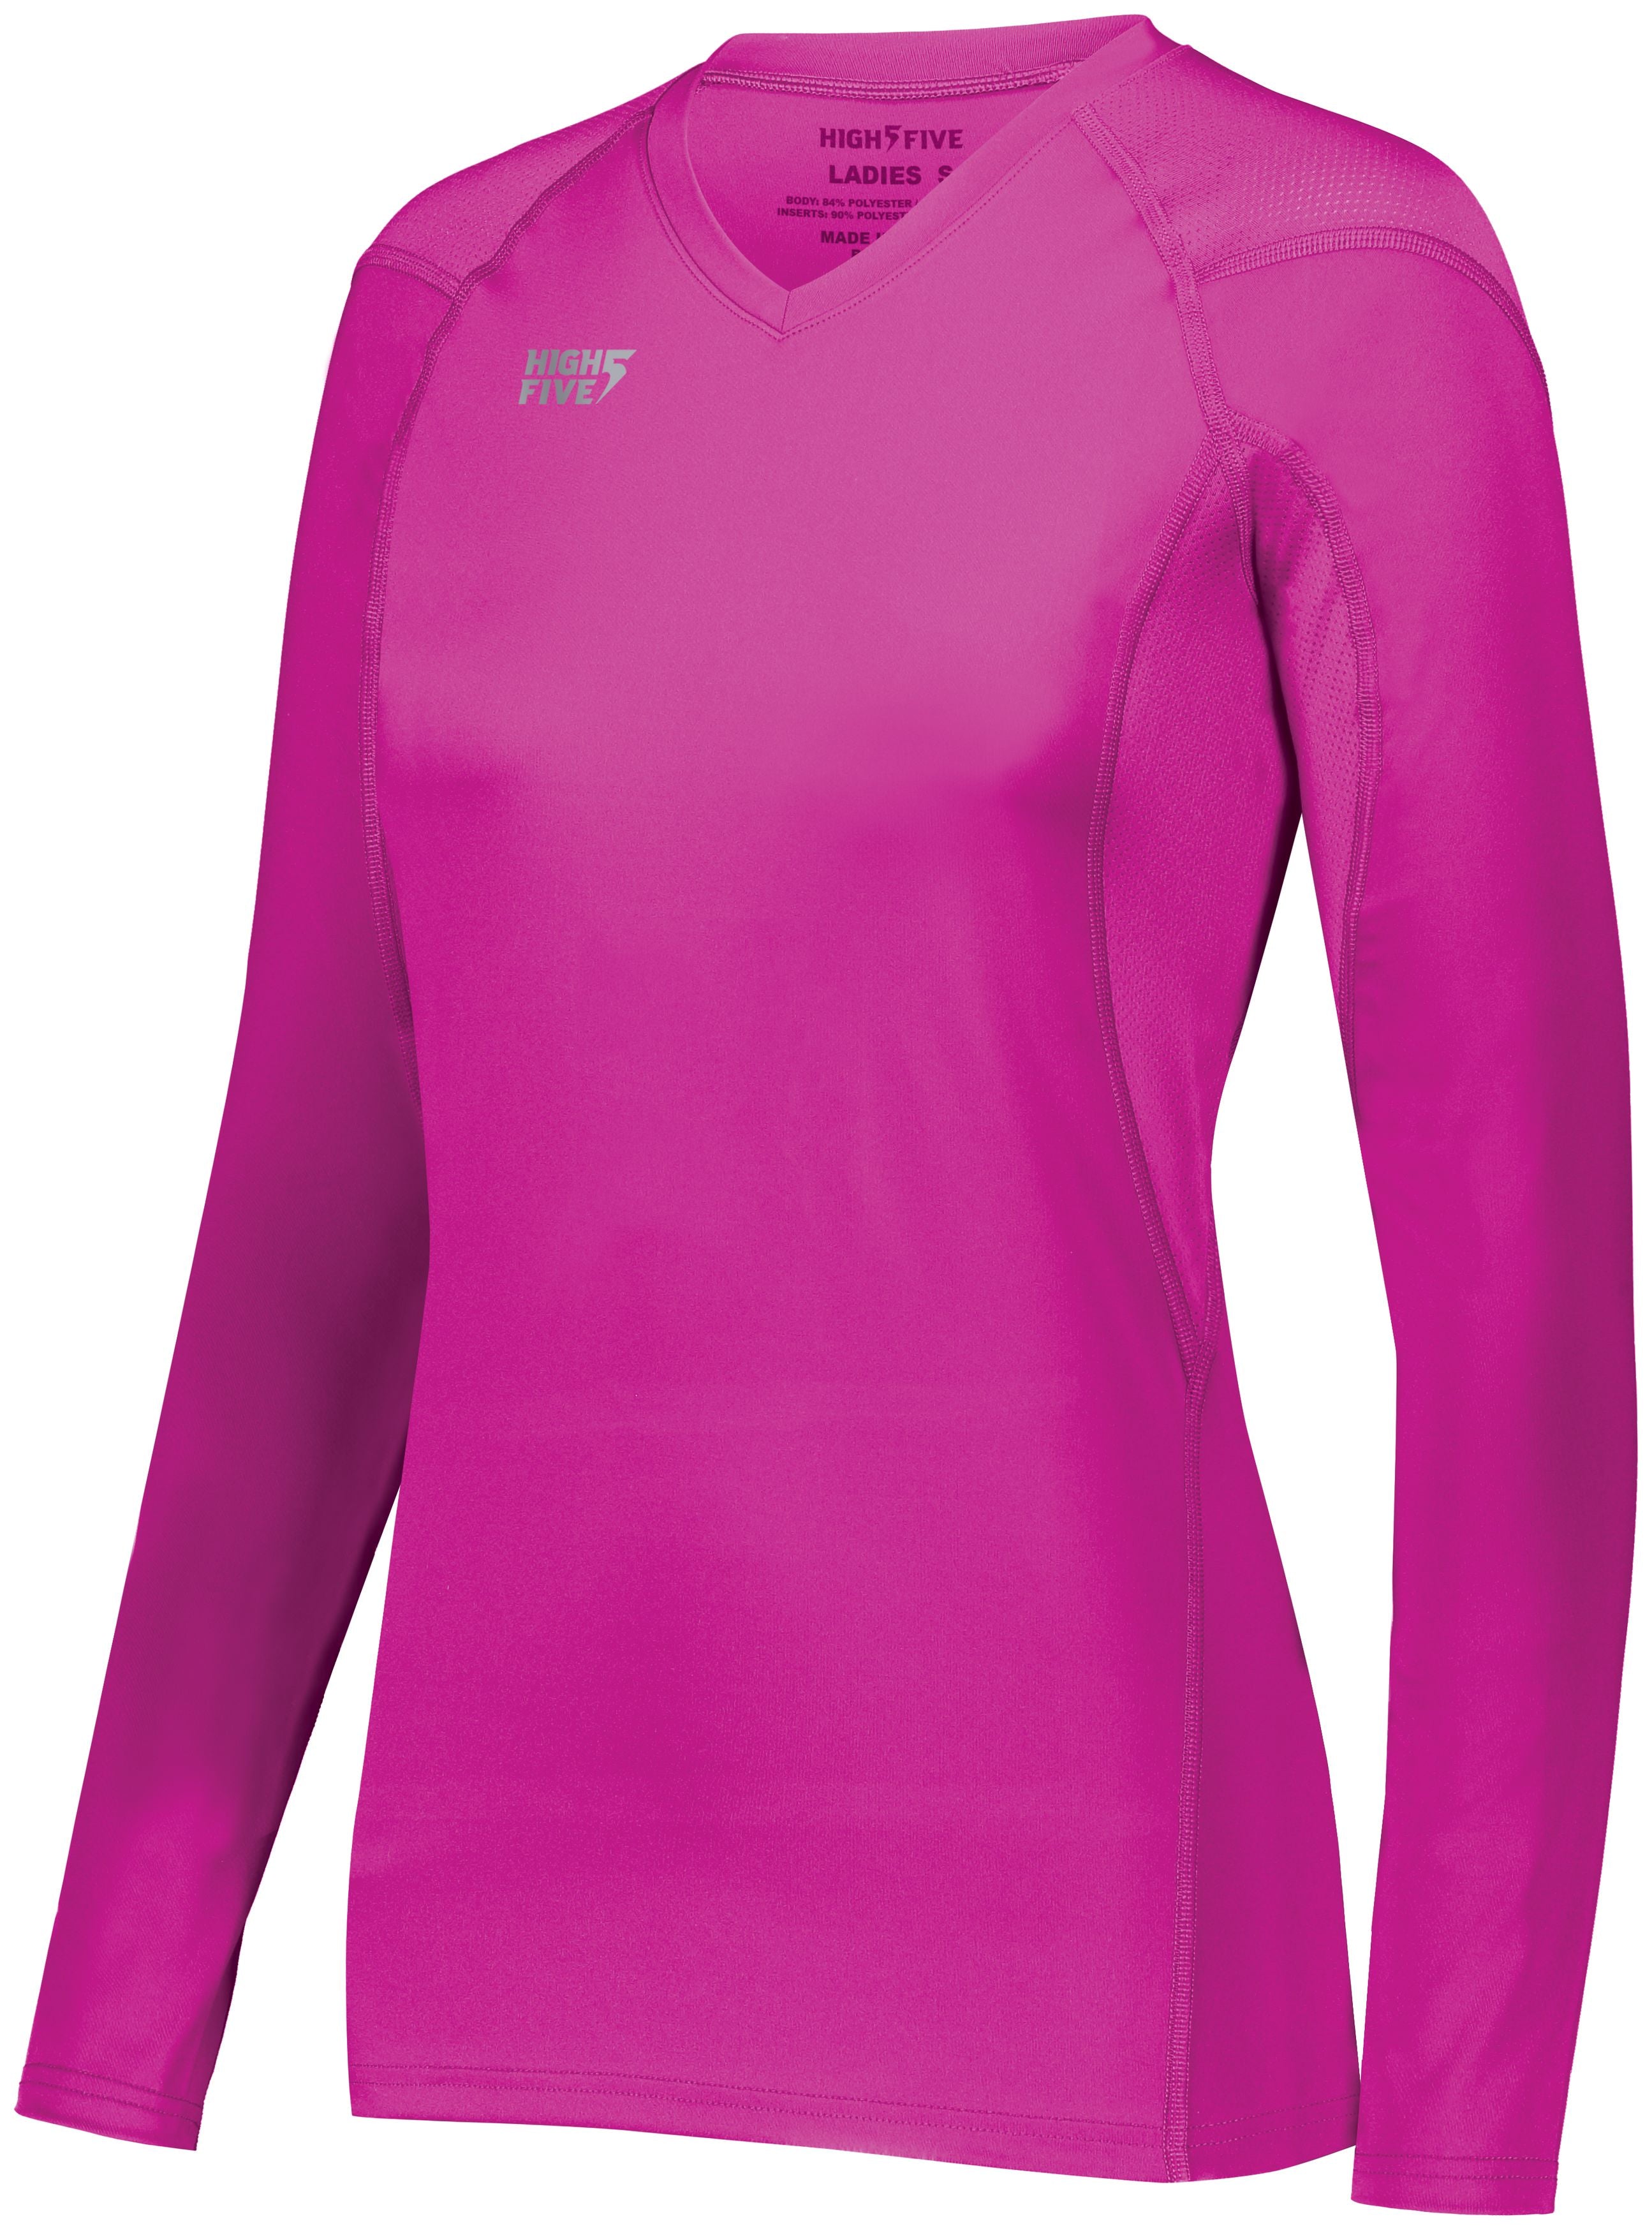 High 5 Ladies Truhit Long Sleeve Jersey in Power Pink  -Part of the Ladies, Ladies-Jersey, High5-Products, Volleyball, Shirts product lines at KanaleyCreations.com